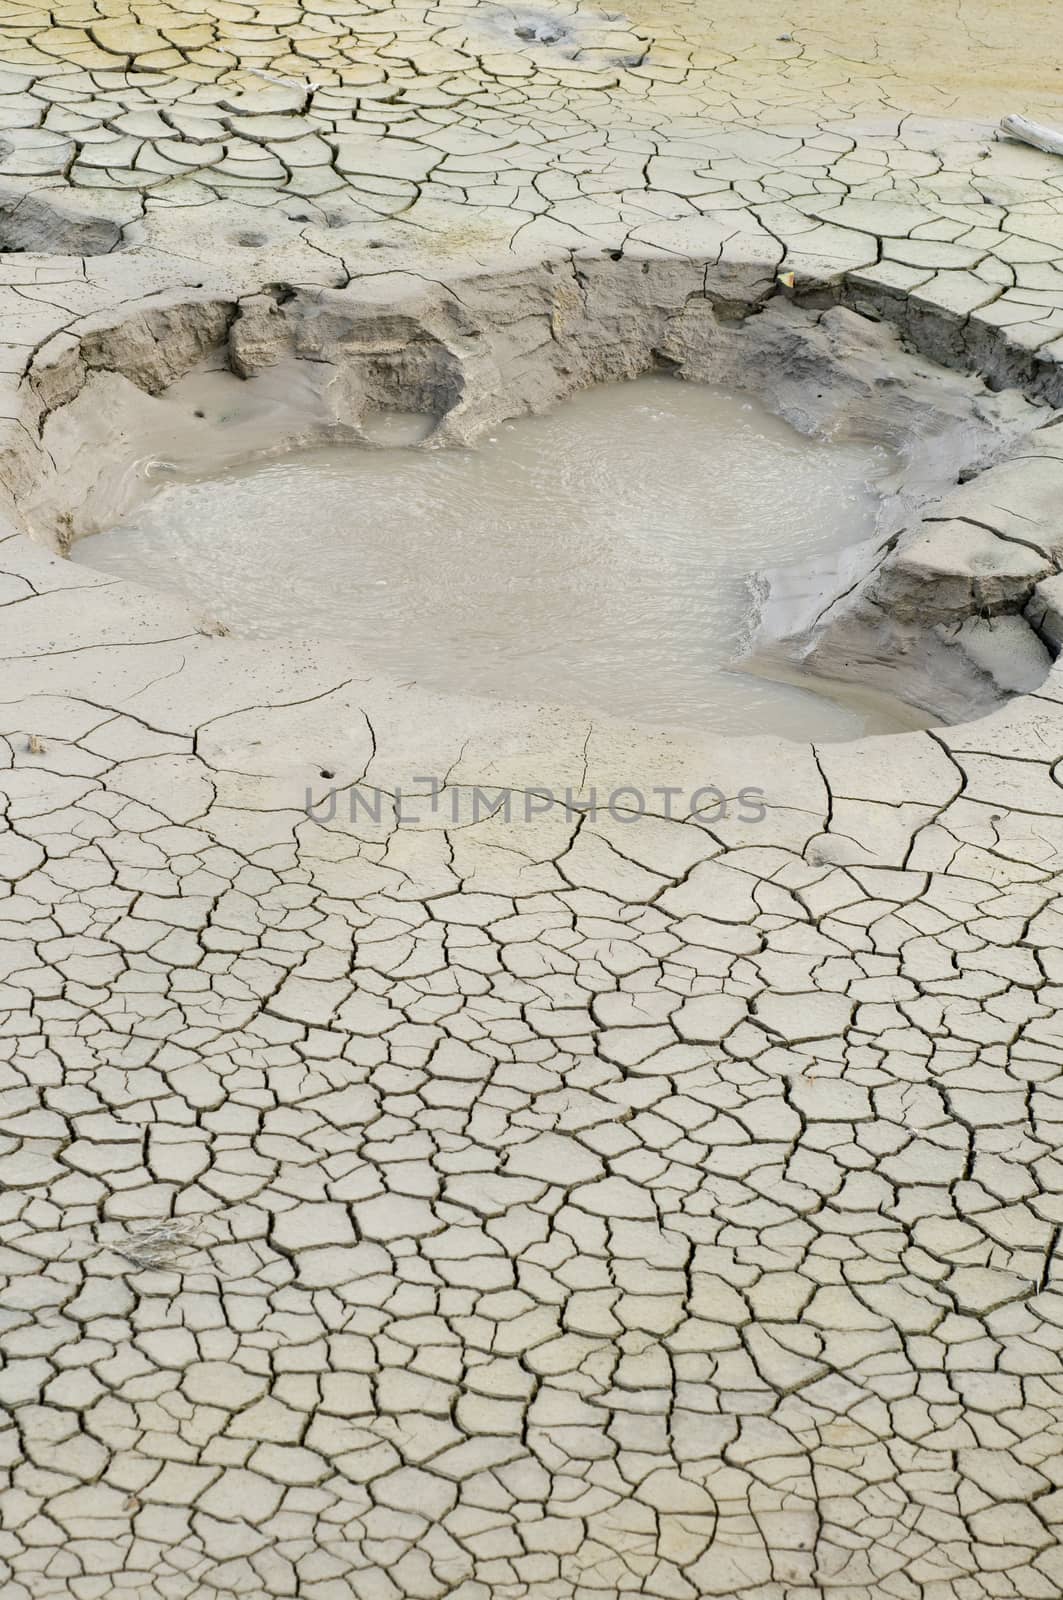 Mudpot in the Mud Volcano Group of Yellowstone National Park, Wy by Njean